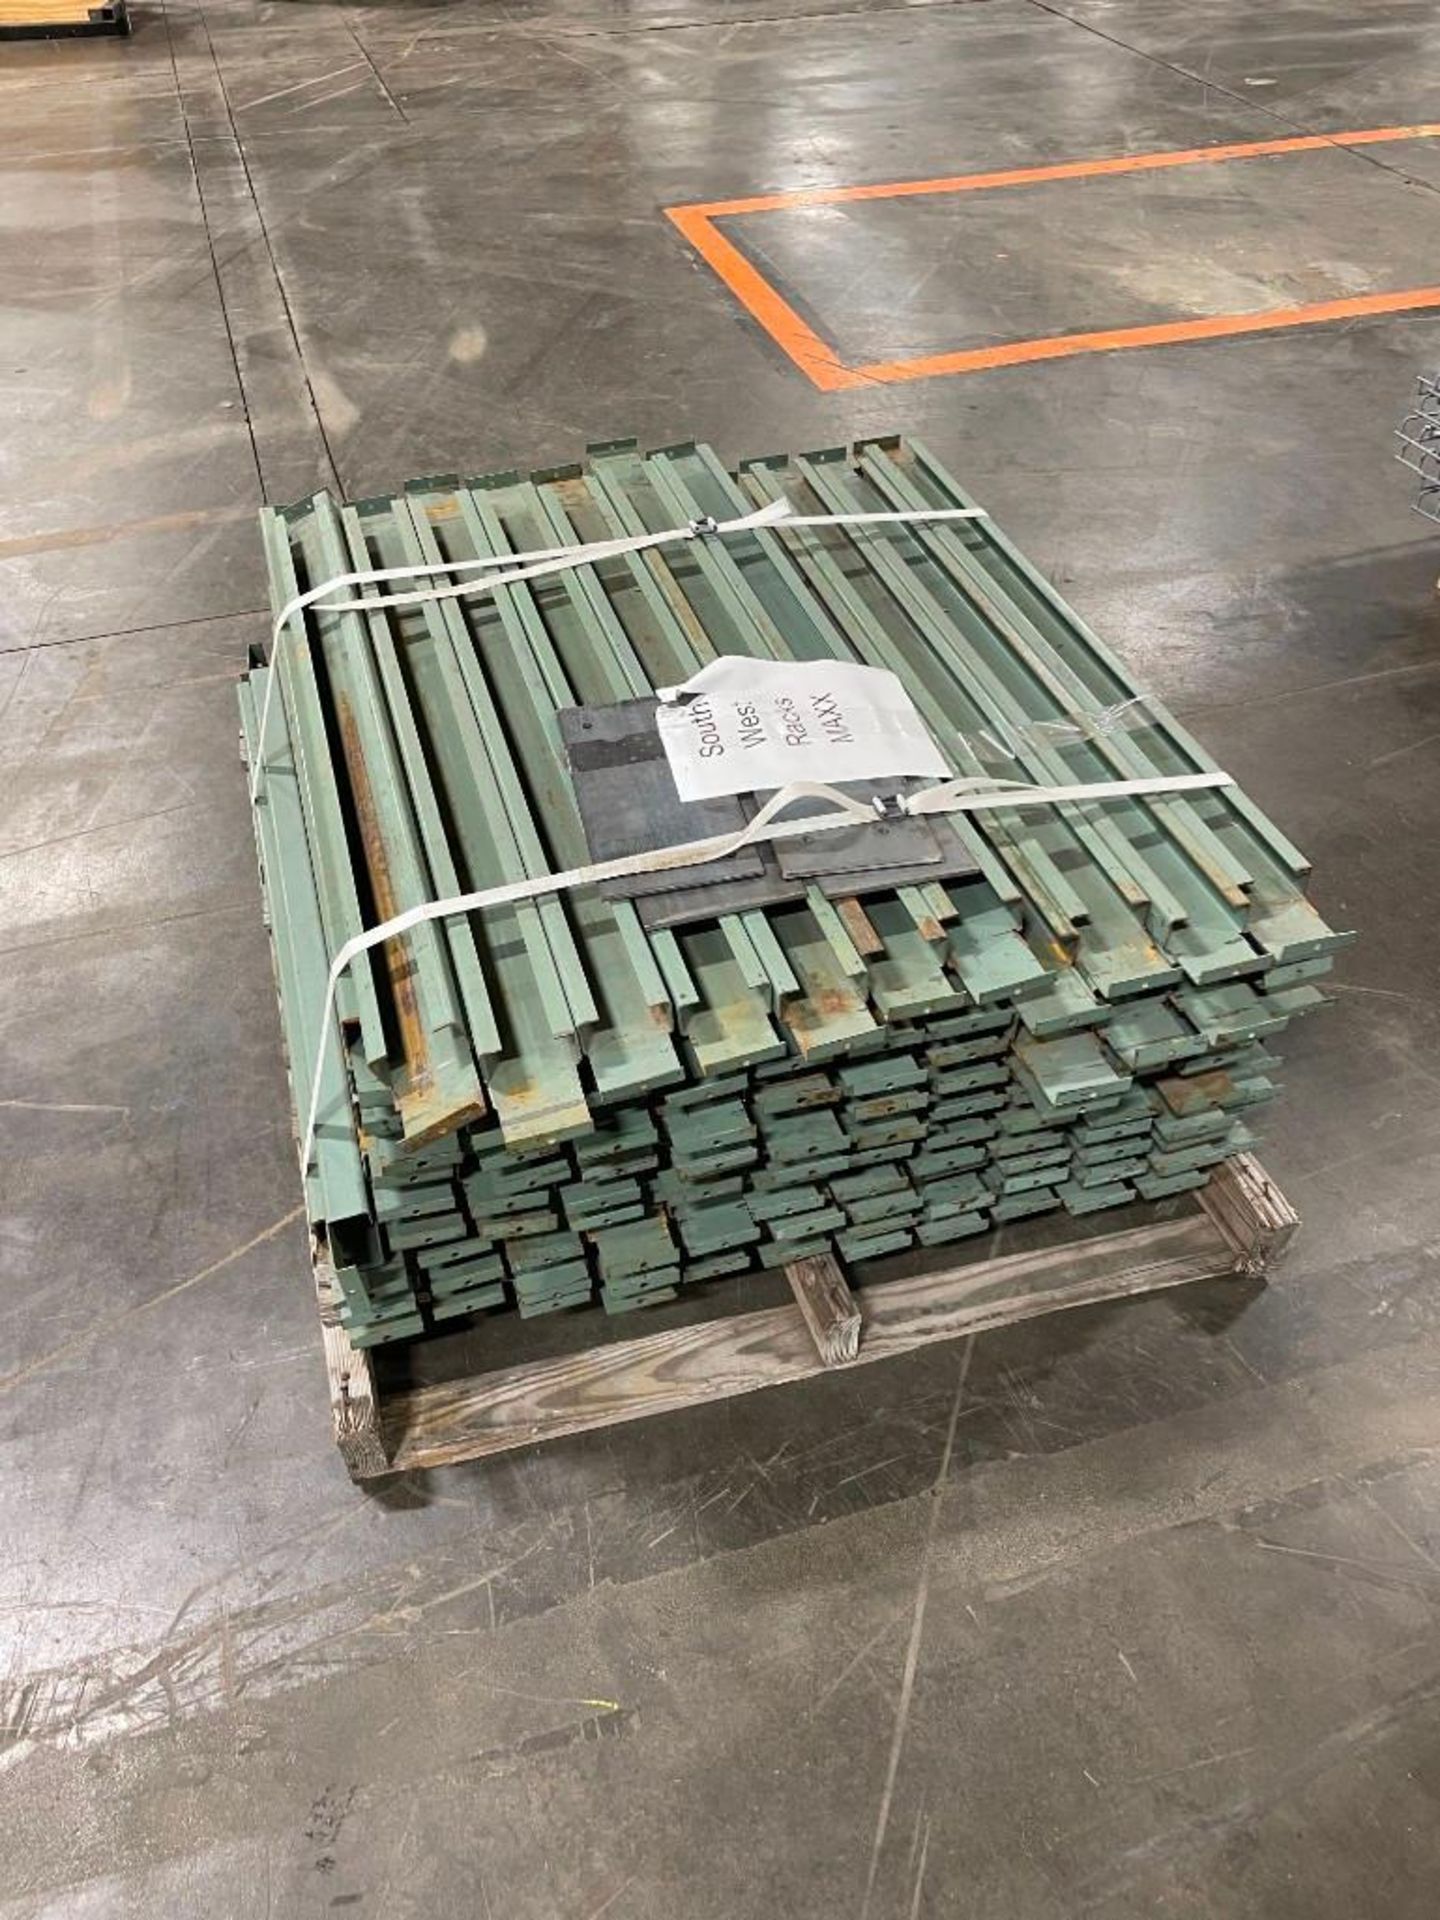 Lot of Pallet Racking, Cross beam supports 44" long - Image 2 of 2